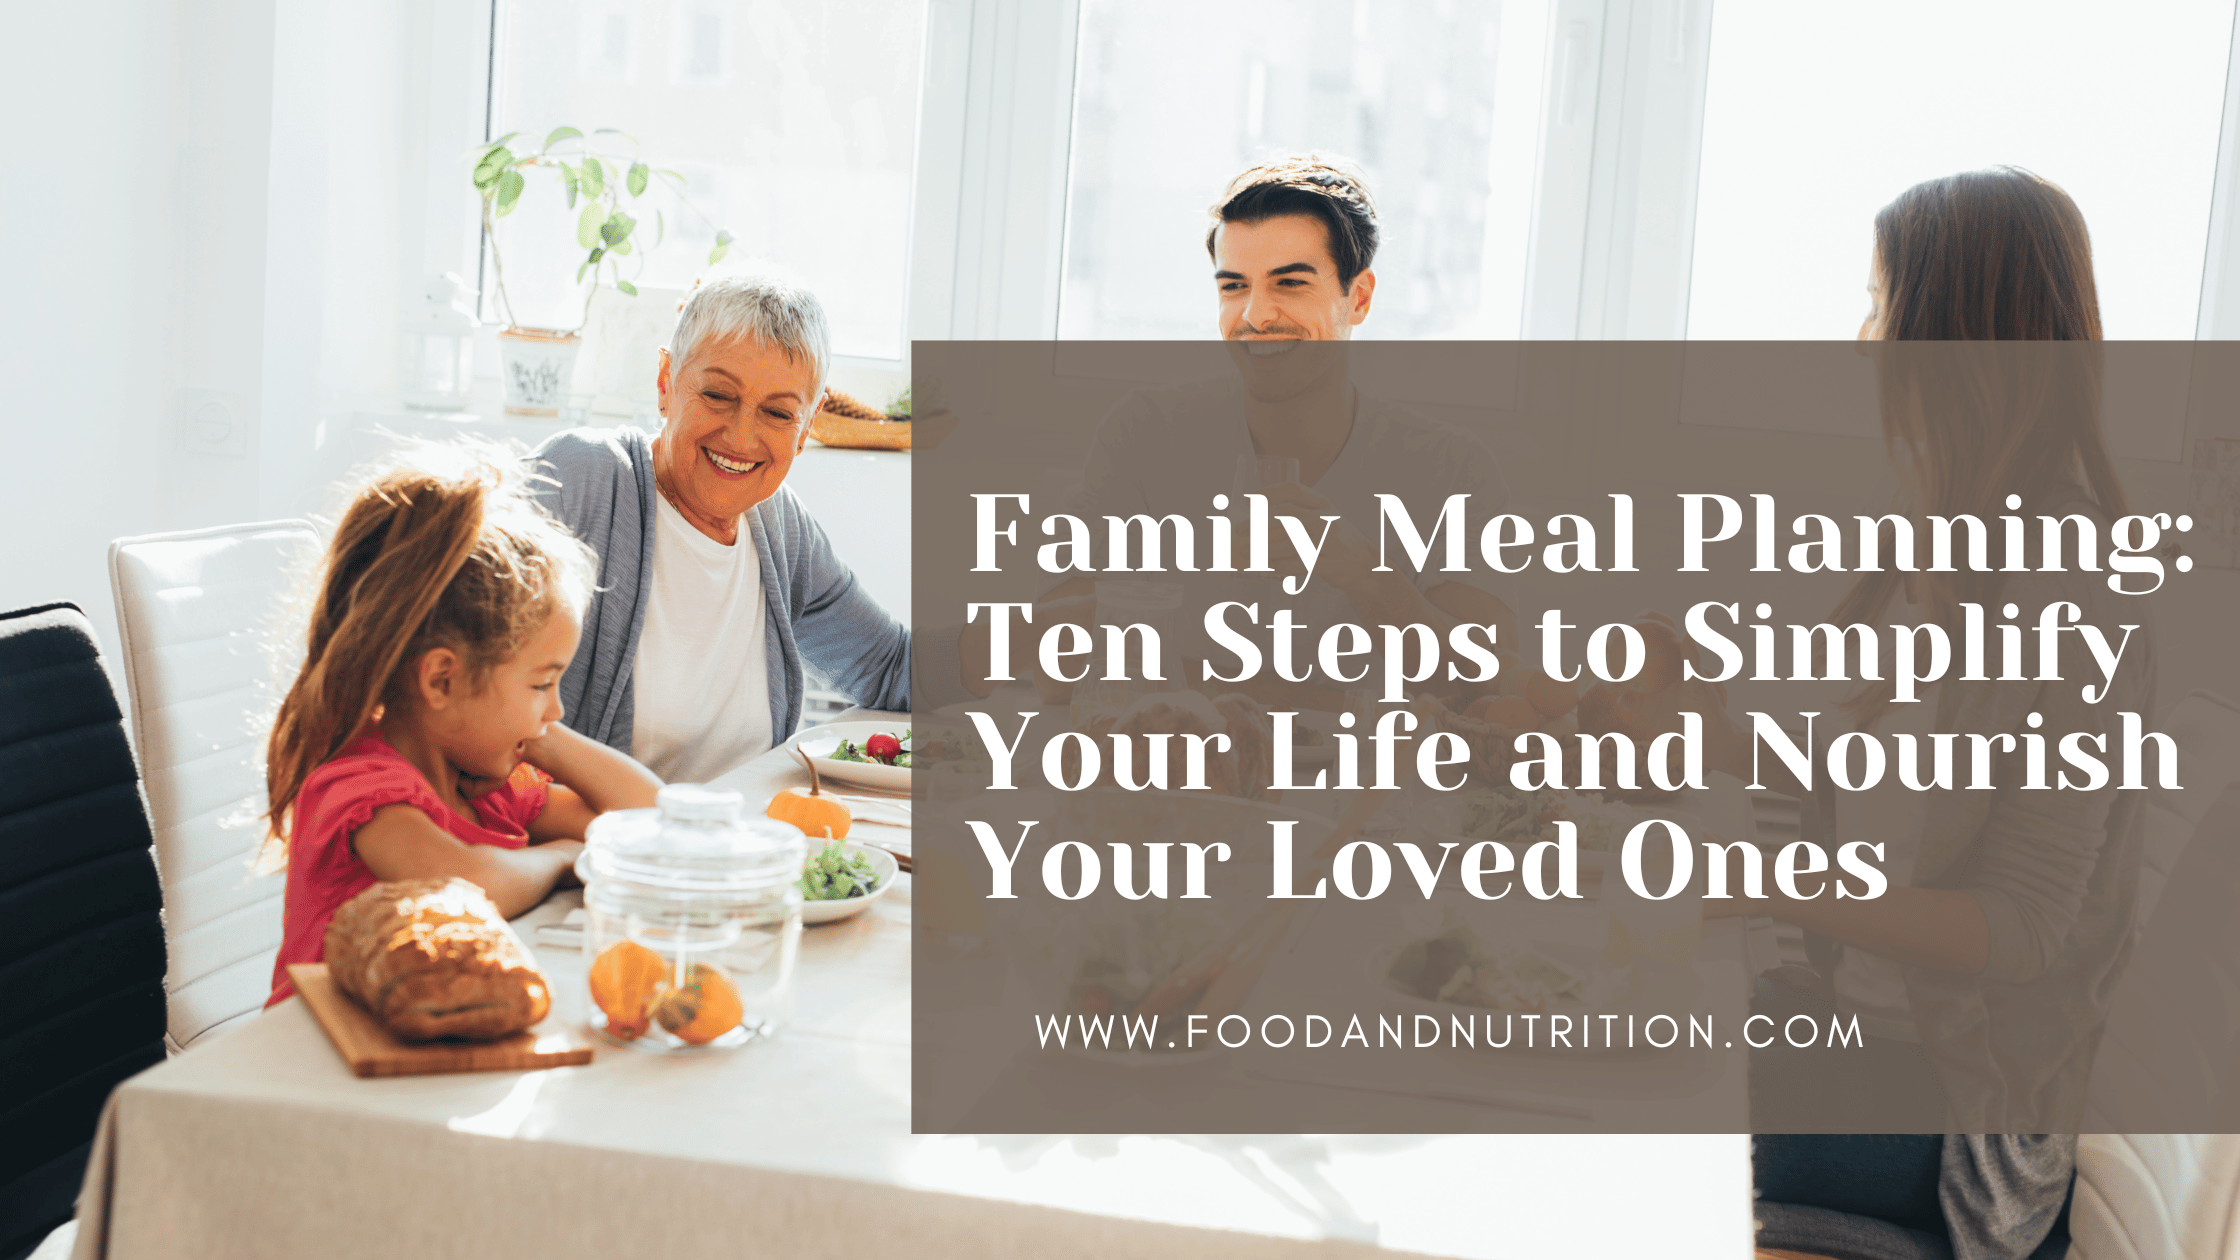 Family Meal Planning: Ten Steps to Simplify Your Life and Nourish Your Loved Ones